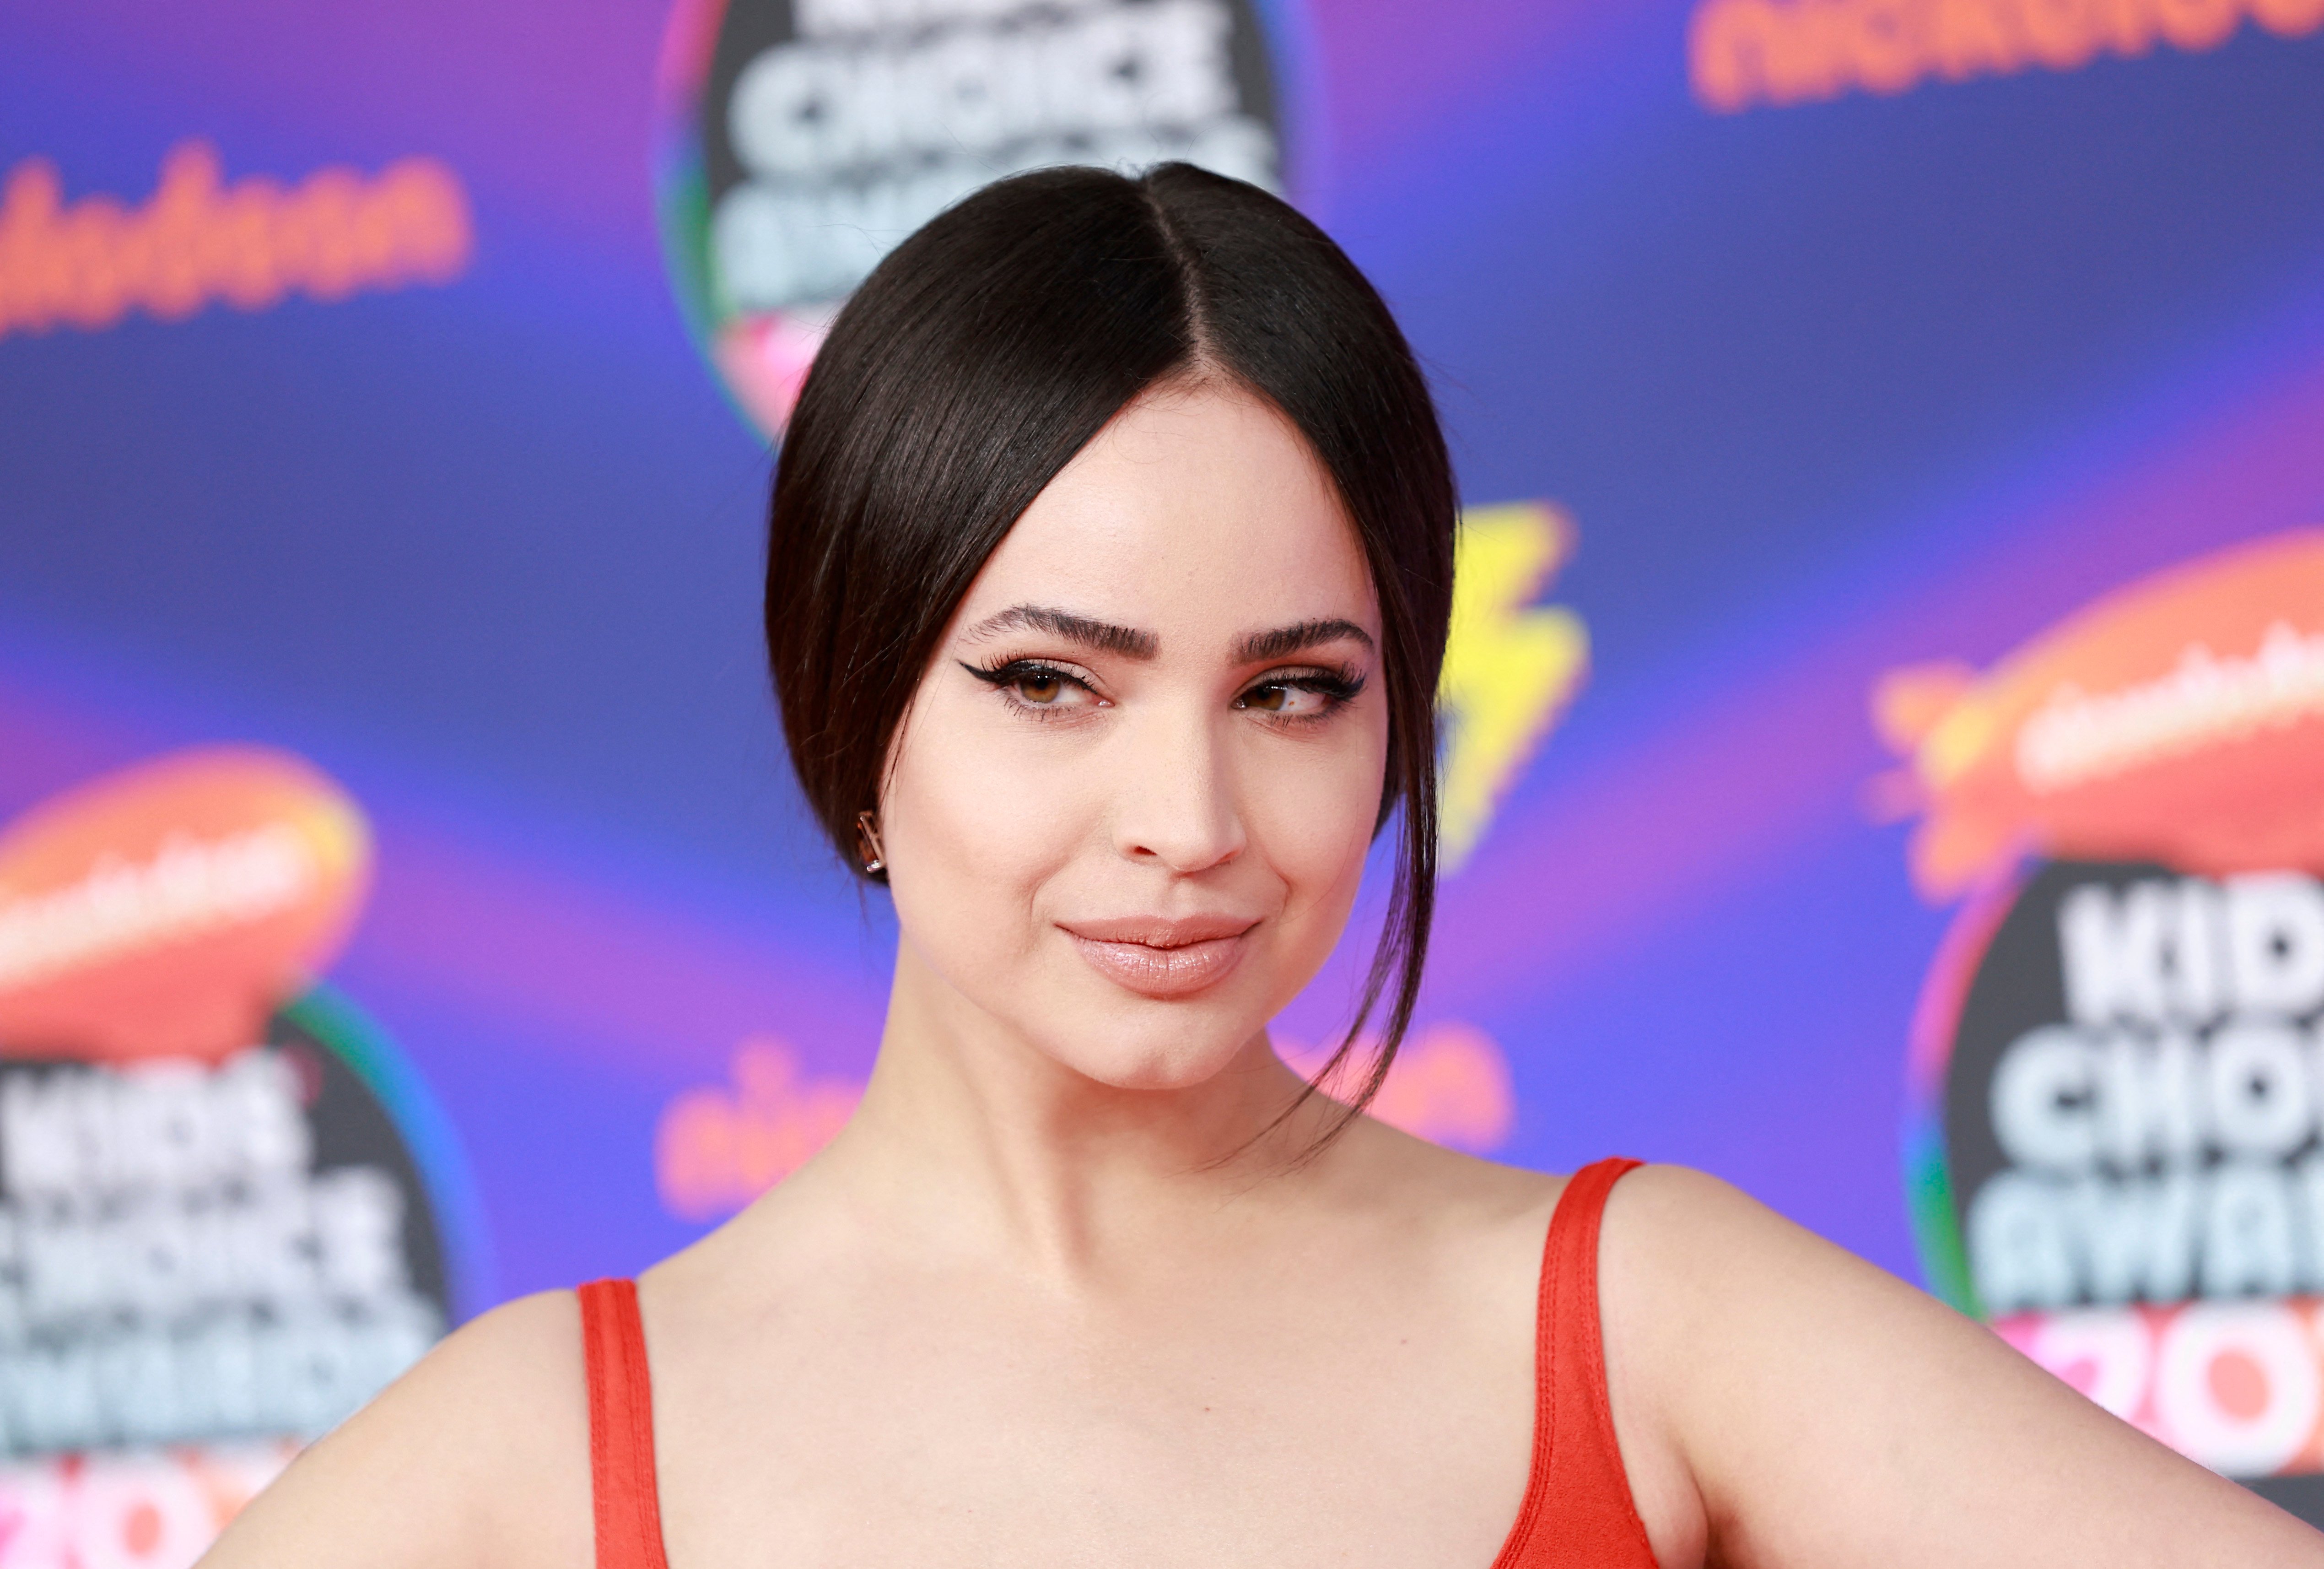 US actress Sofia Carson attends the 2022 Nickelodeon Kids' Choice Awards